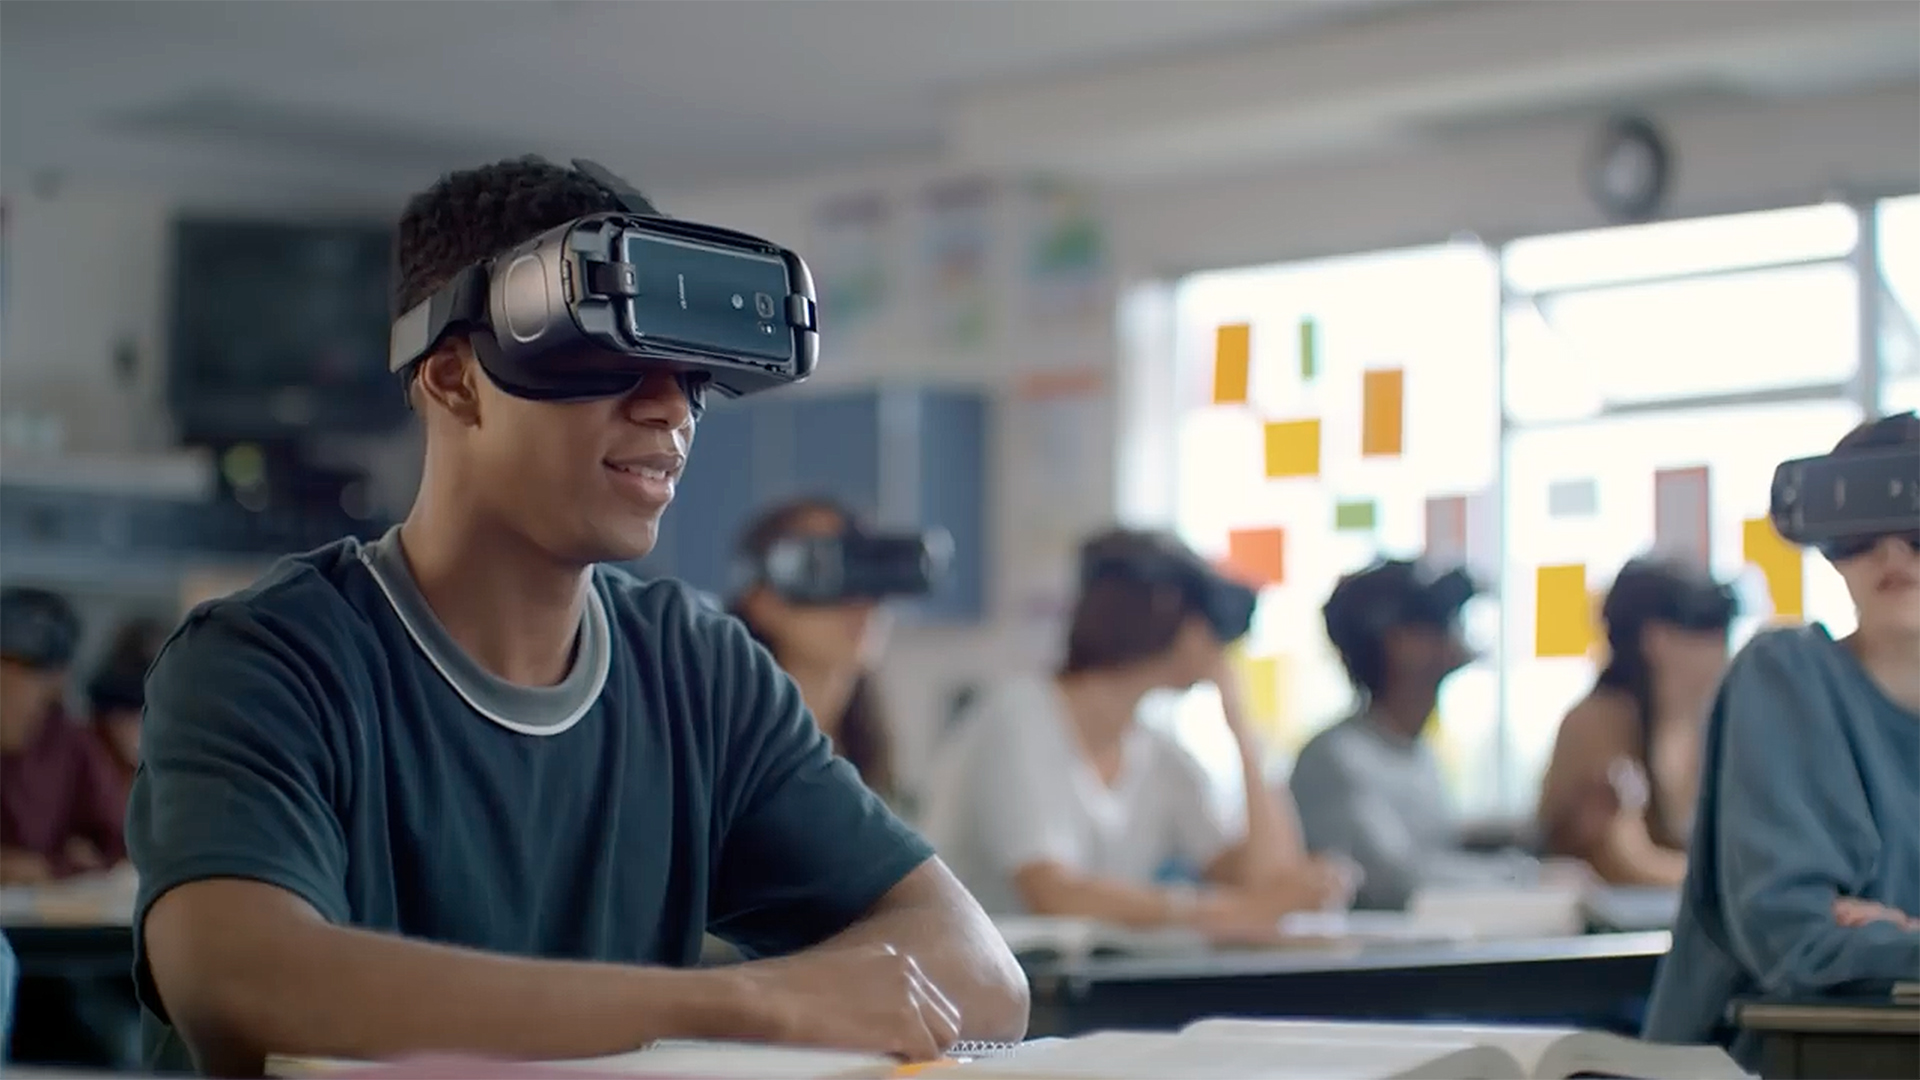 Best Vr And Ar Systems For Schools 2021, Oculus Go Bathtub Commercial